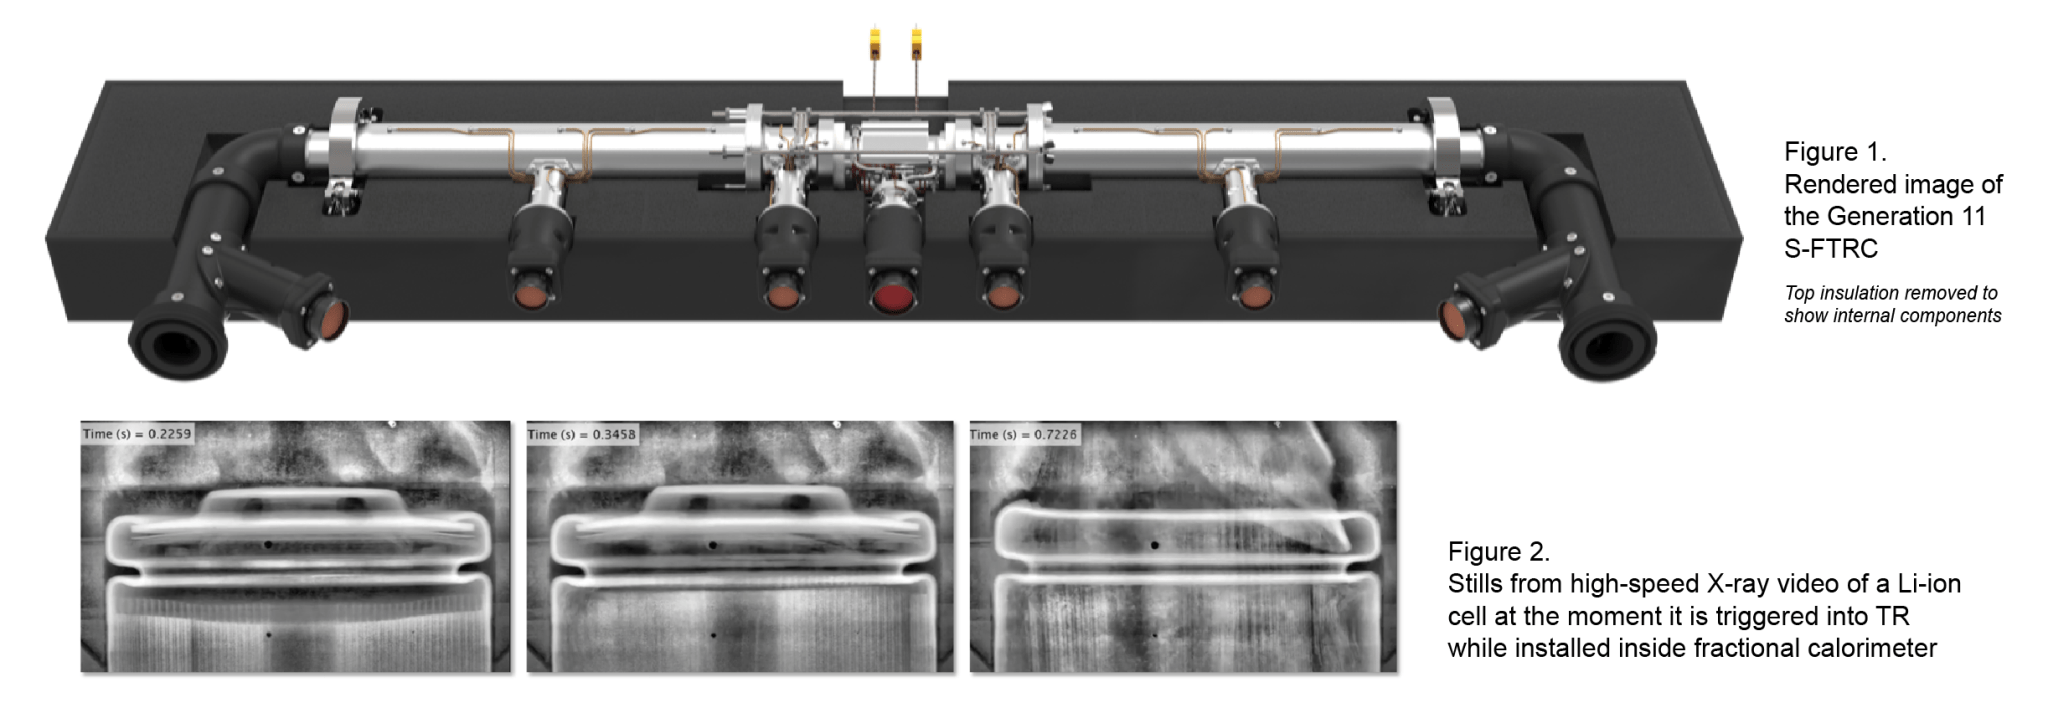 Figure 1. Rendered image of the Generation 11 S-FTRC. Top insulation removed to show internal components.
Figure 2. Stills from high-speed X-ray video of a Li-ion cell at the moment it is triggered into TR while installed inside fractional calorimeter